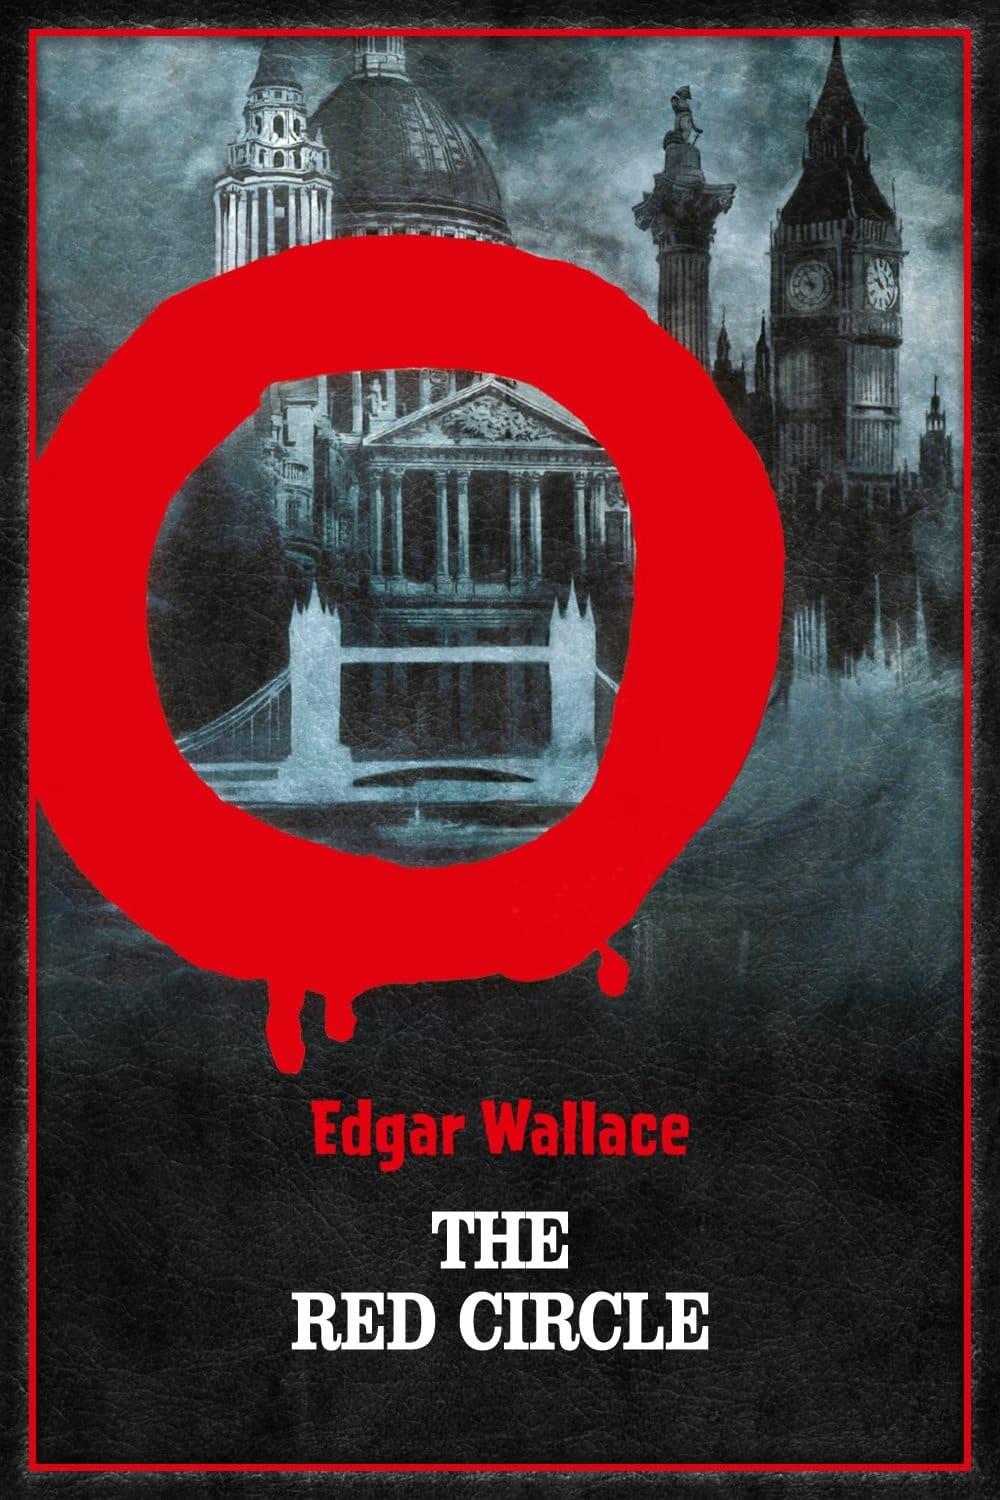 The Red Circle poster